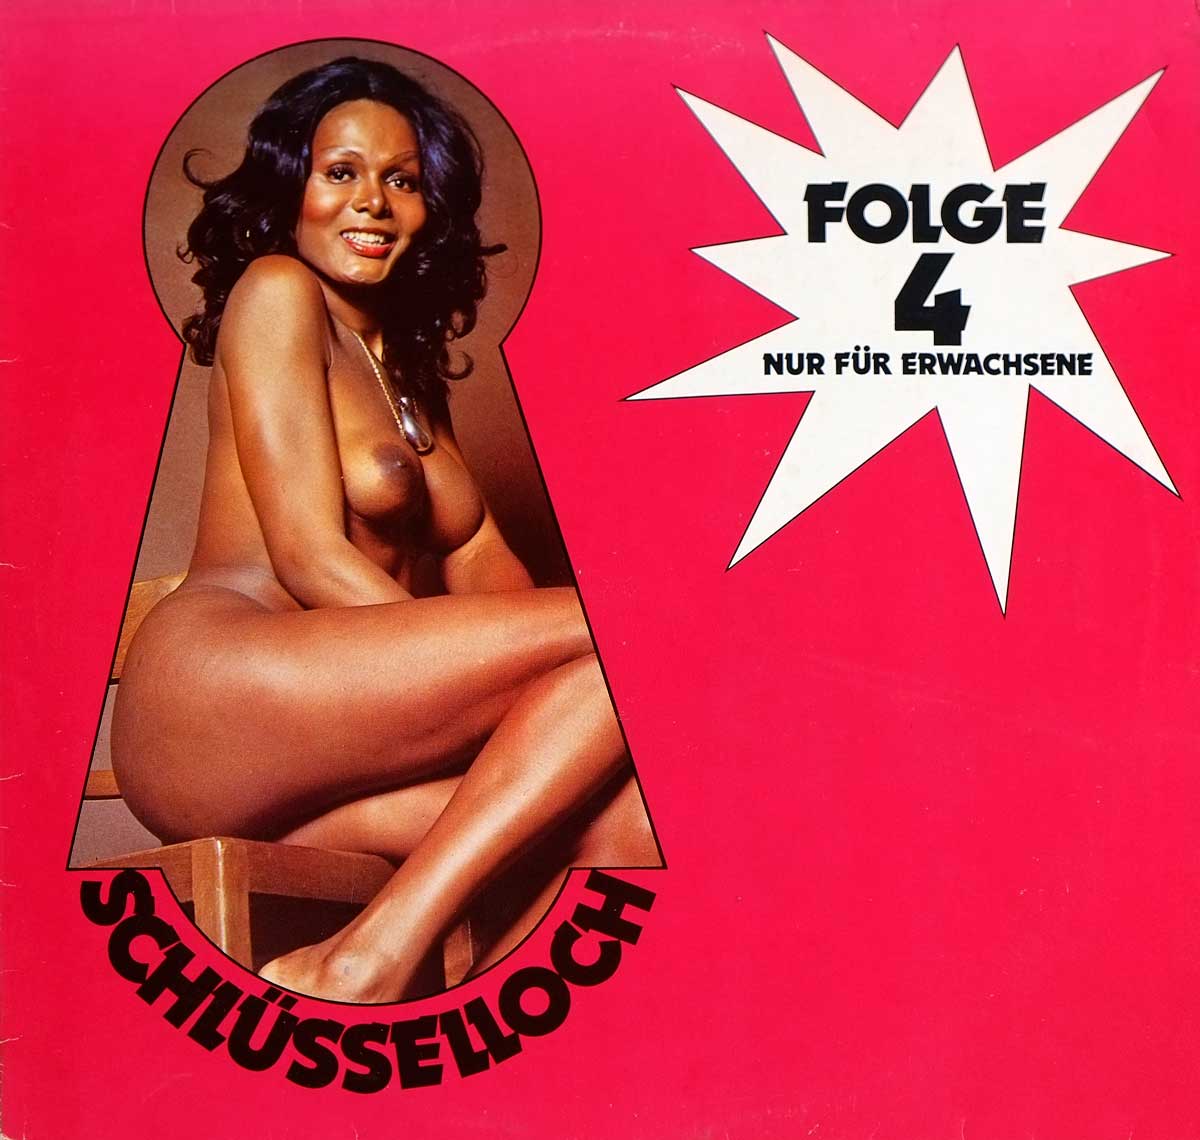 High Quality Photo of Album Front Cover  "SCHLUSSELLOCH - Folge 4 Pssst Sexy Cover Entertainment for Adults"